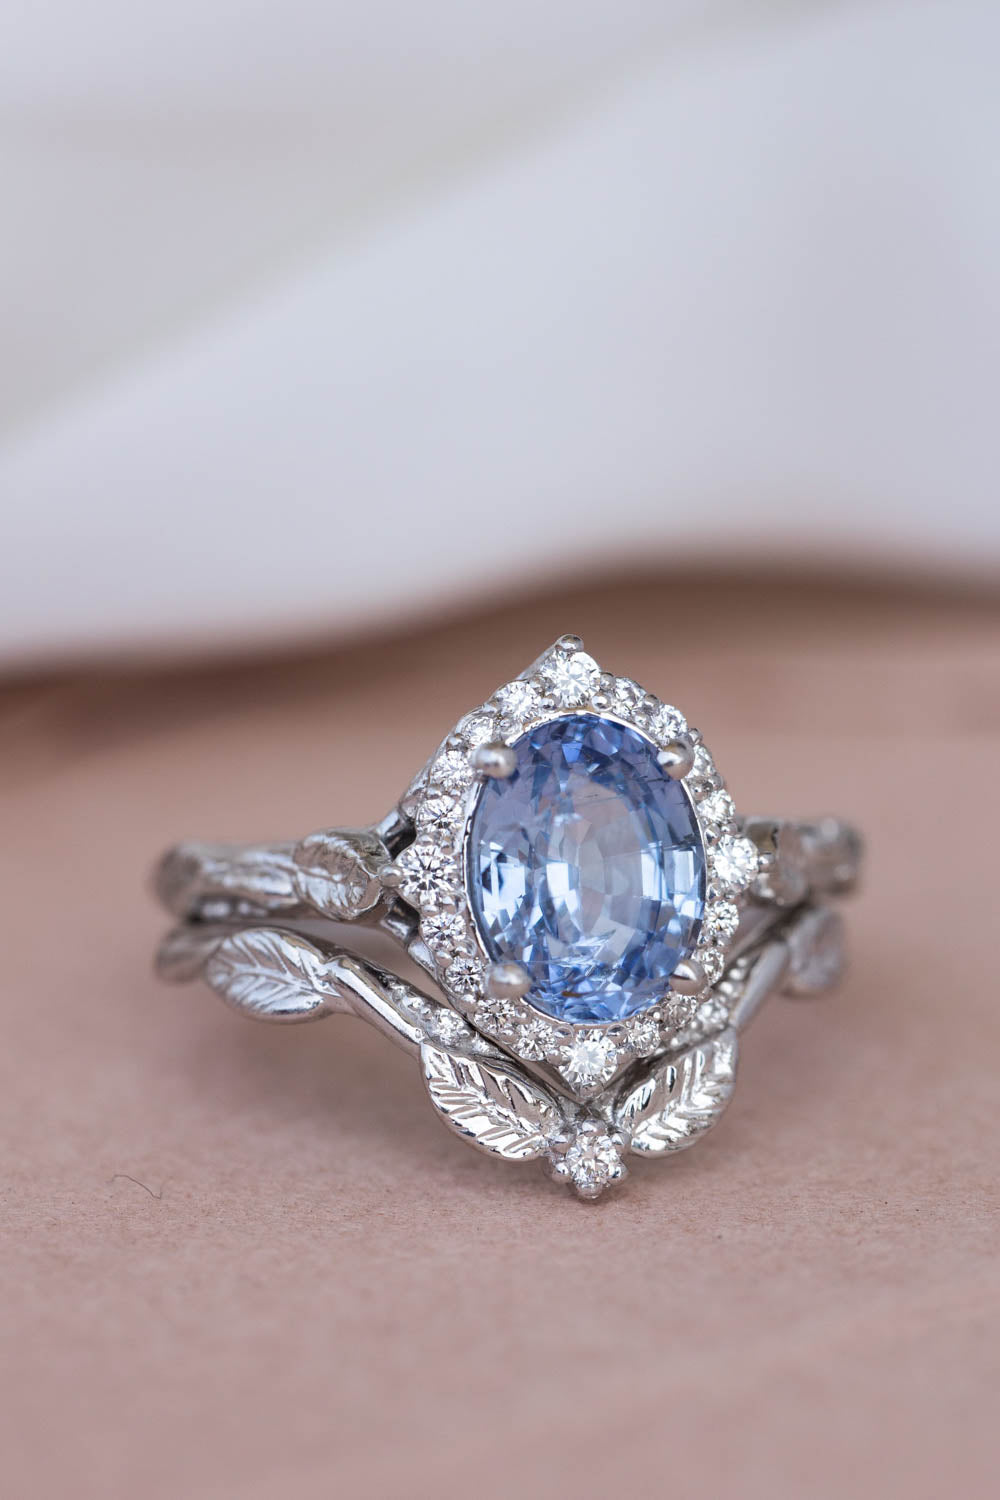 Amazing! Old Jewelry Became These Gorgeous Engagement and Wedding Rings  (See Some Before-and-After Photos) | Glamour